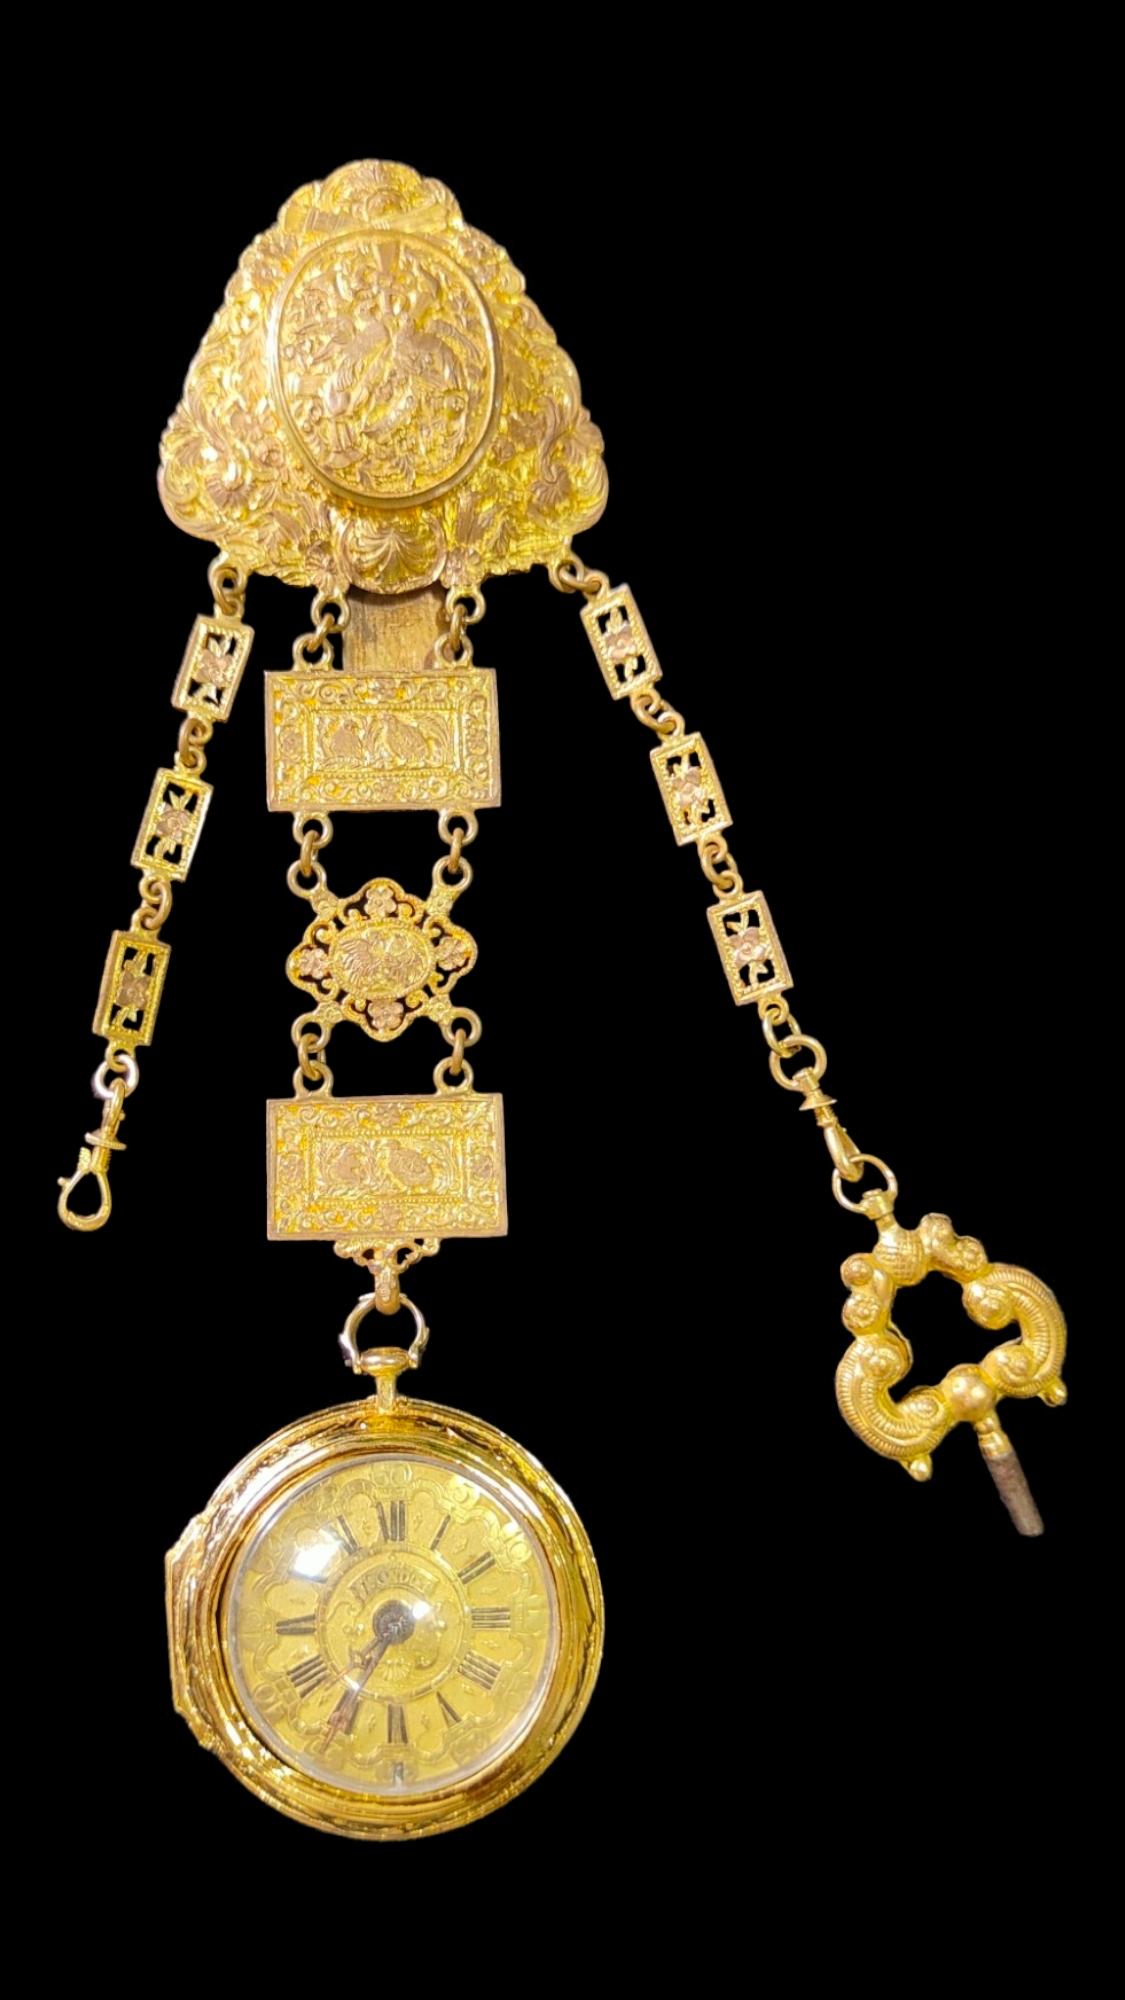 17th Century German Pocket Watch In 18k Gold For Sale 8